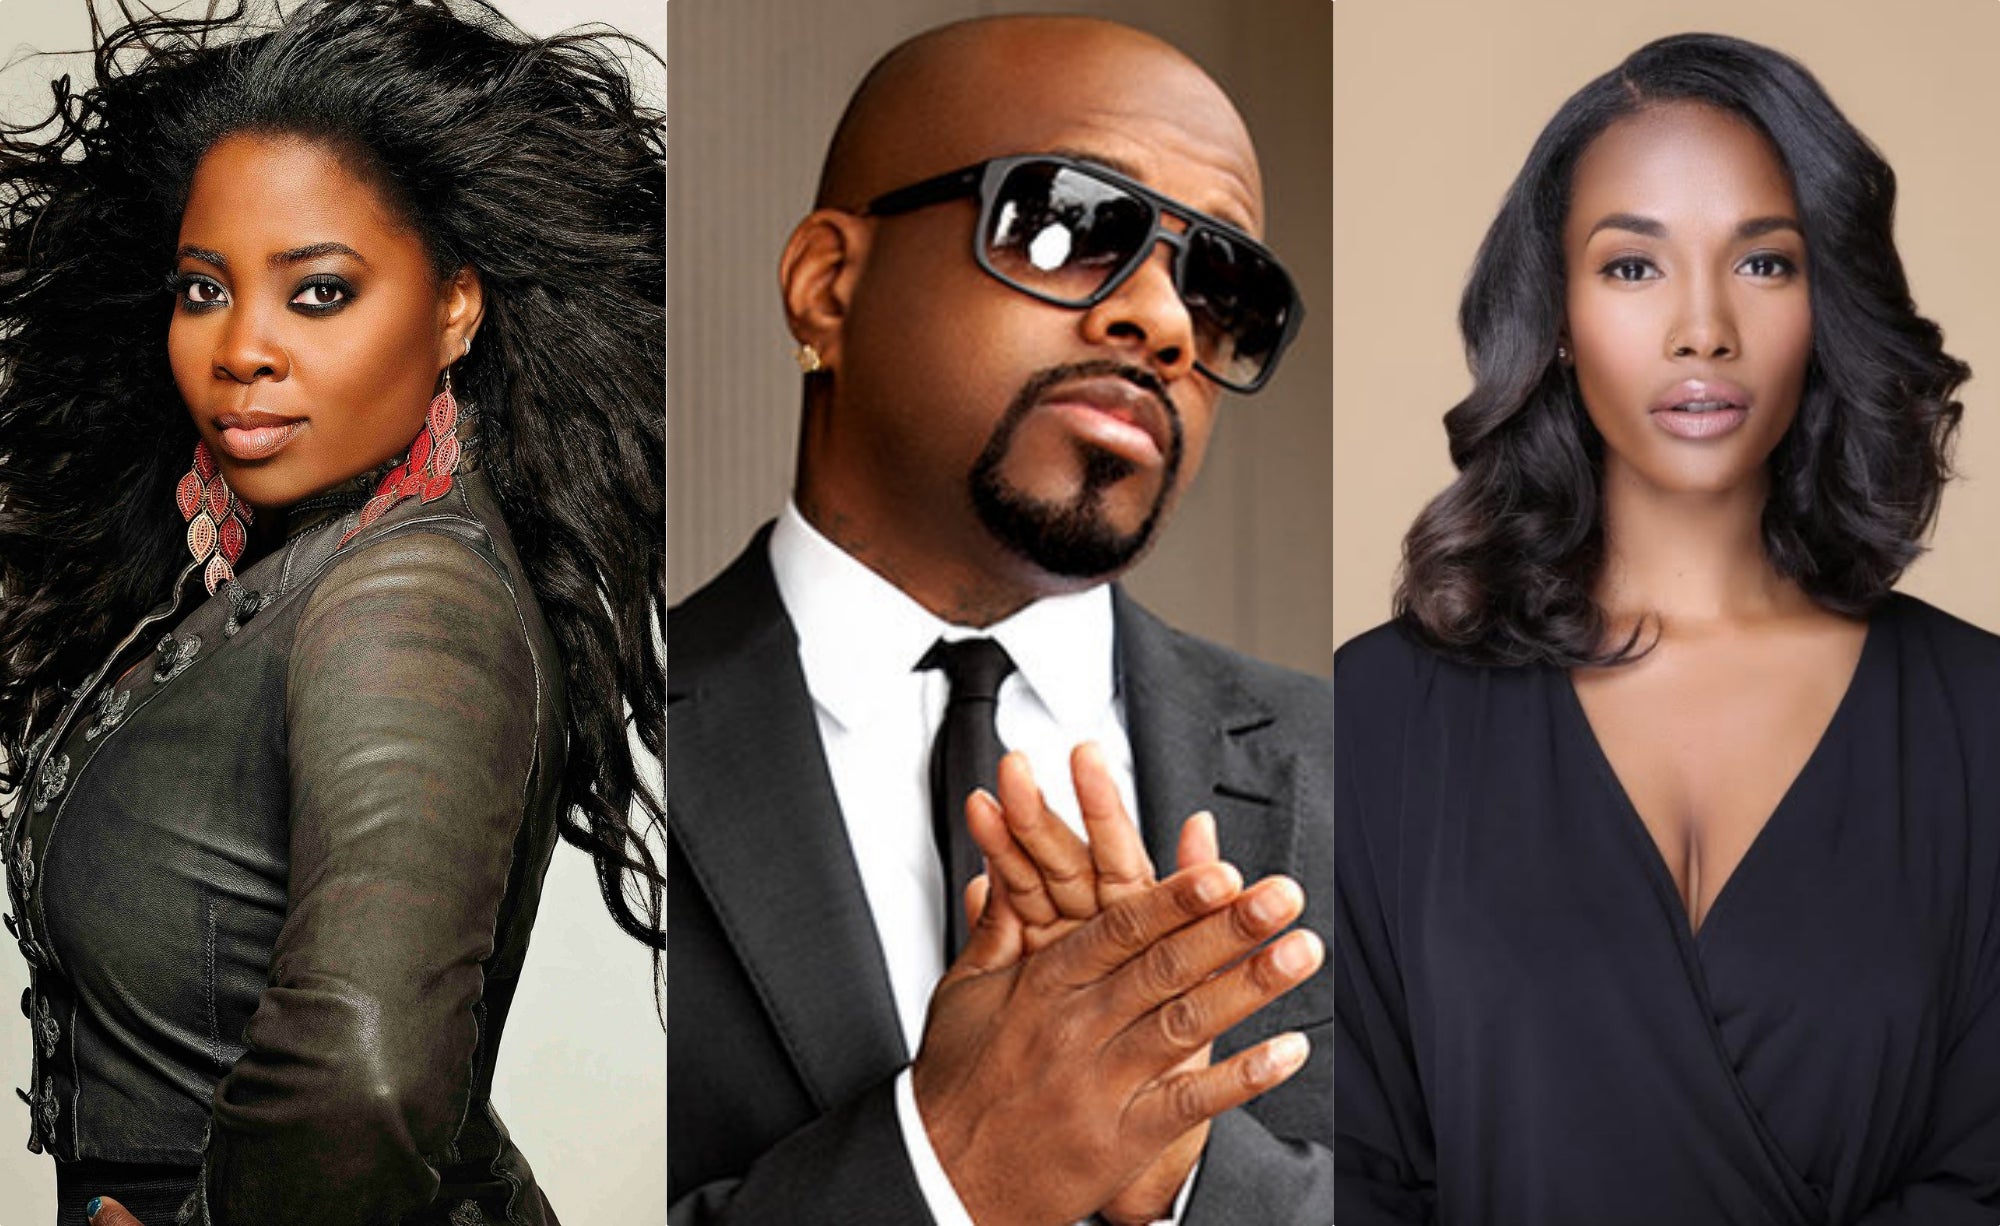 Queen Latifah, T.I., Rapsody & More Added To Lineup For ESSENCE + New Voices Entrepreneur Summit